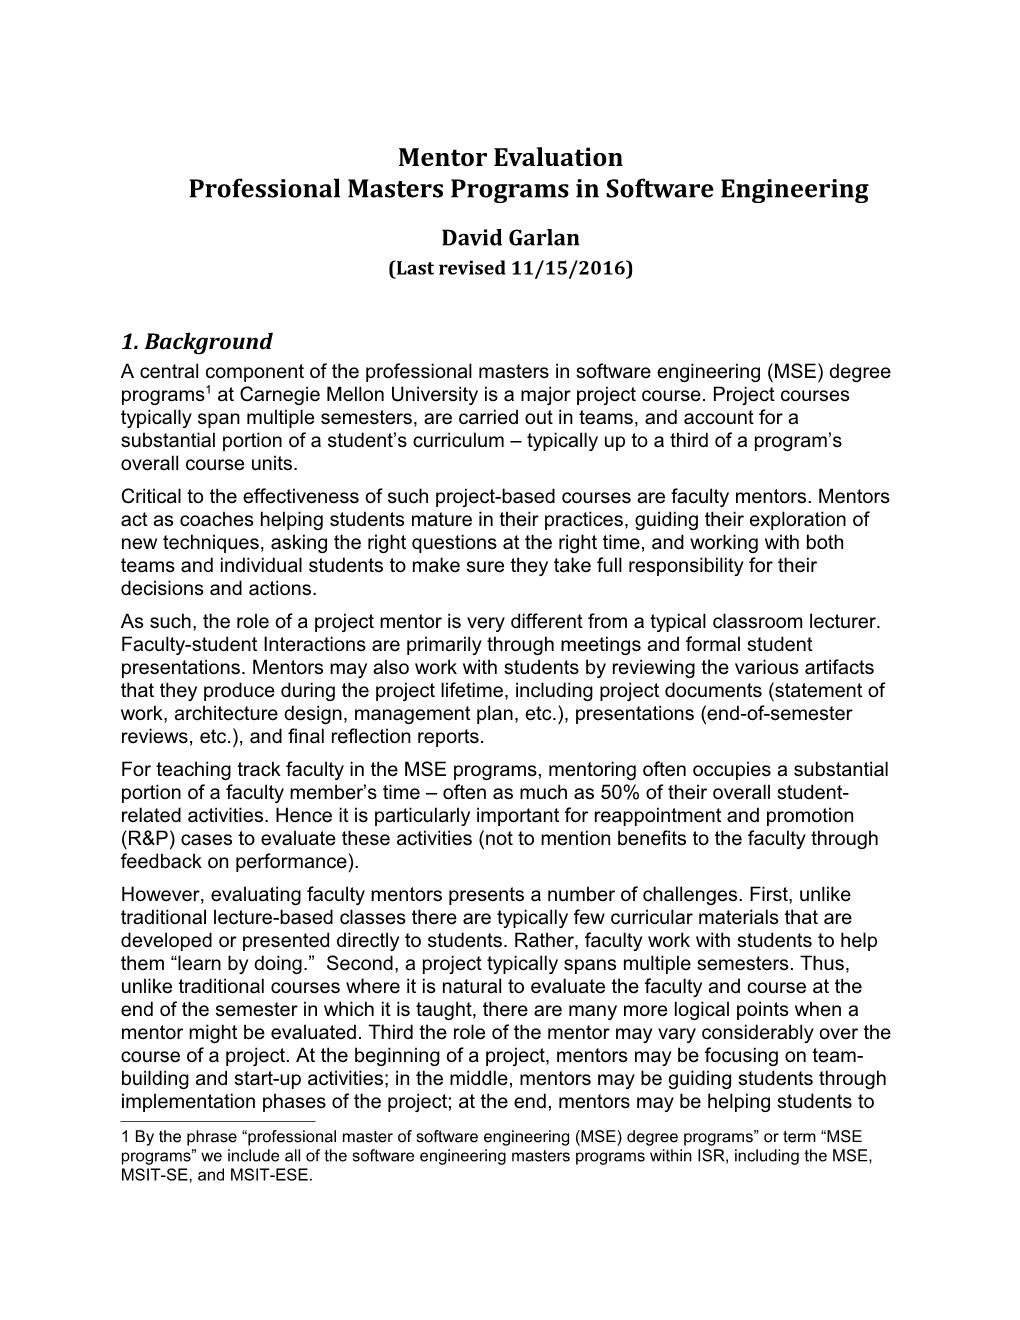 Mentor Evaluationprofessional Masters Programs in Software Engineering